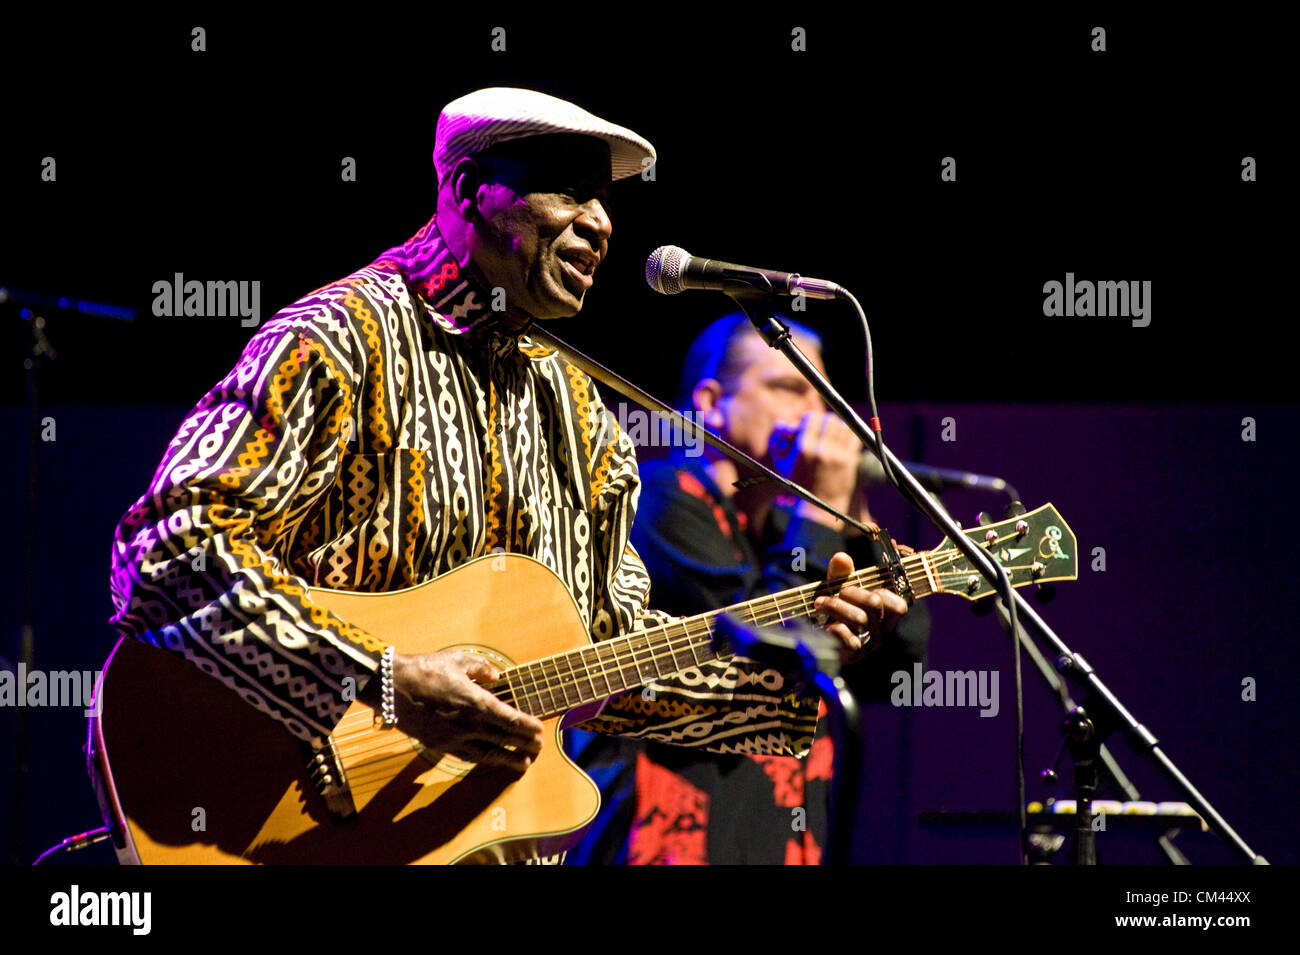 September 29, 2012 - The final concert of the week-long world music festival, largest one in Central Europe, focused on African artists. Boubacar Traoré is said to be the oldest artist in Mali still performing on stage. Stock Photo